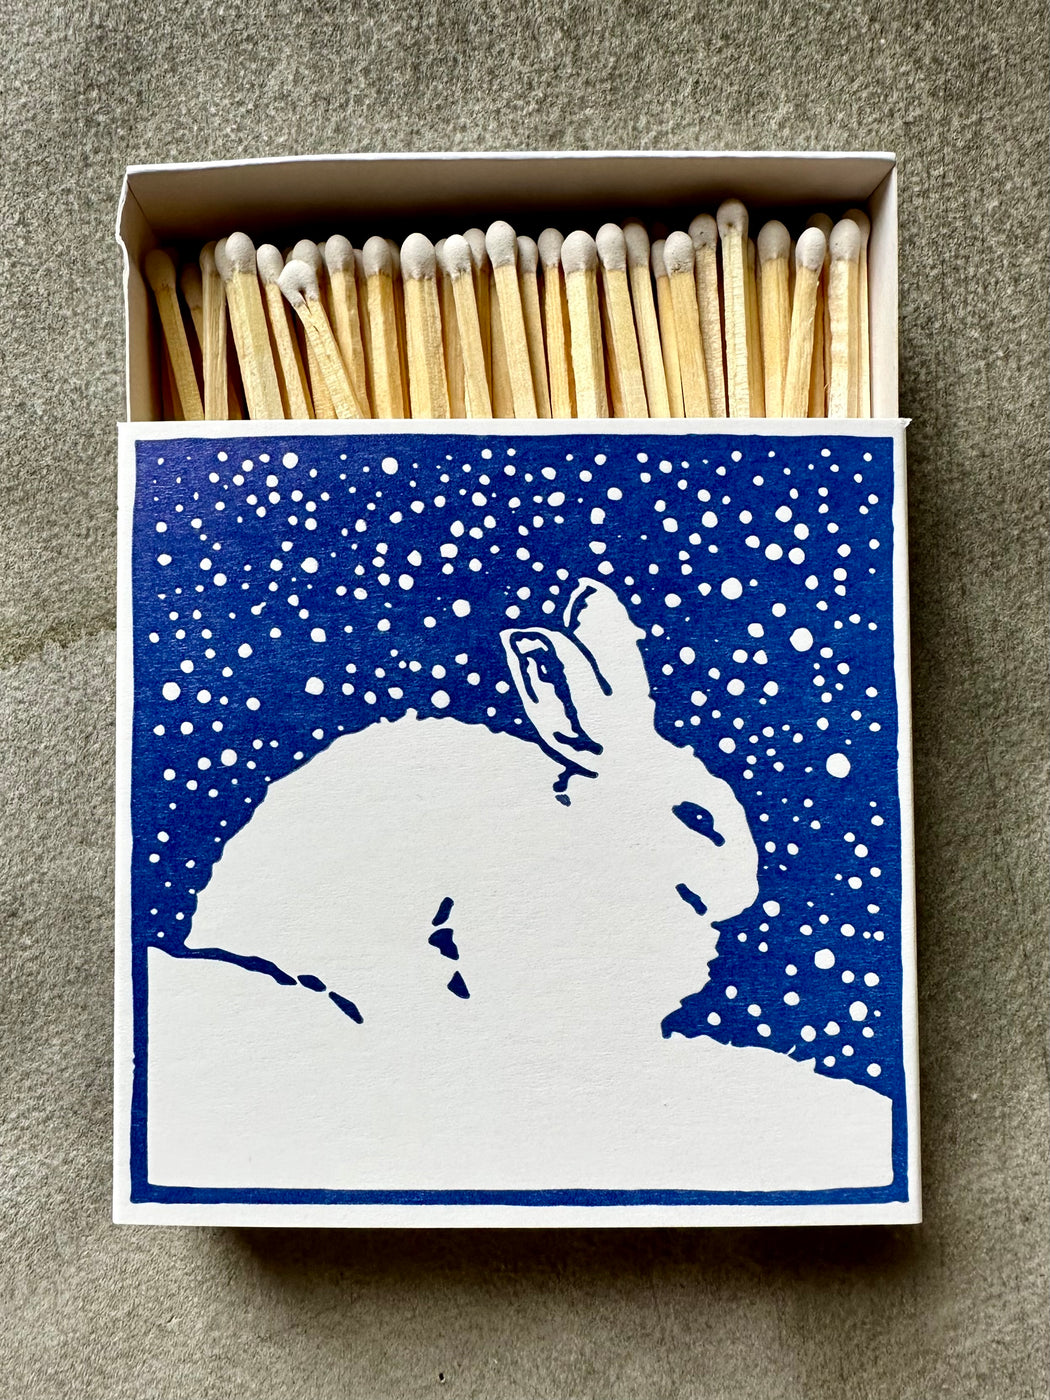 "The Rabbit" Matches by Archivist Gallery